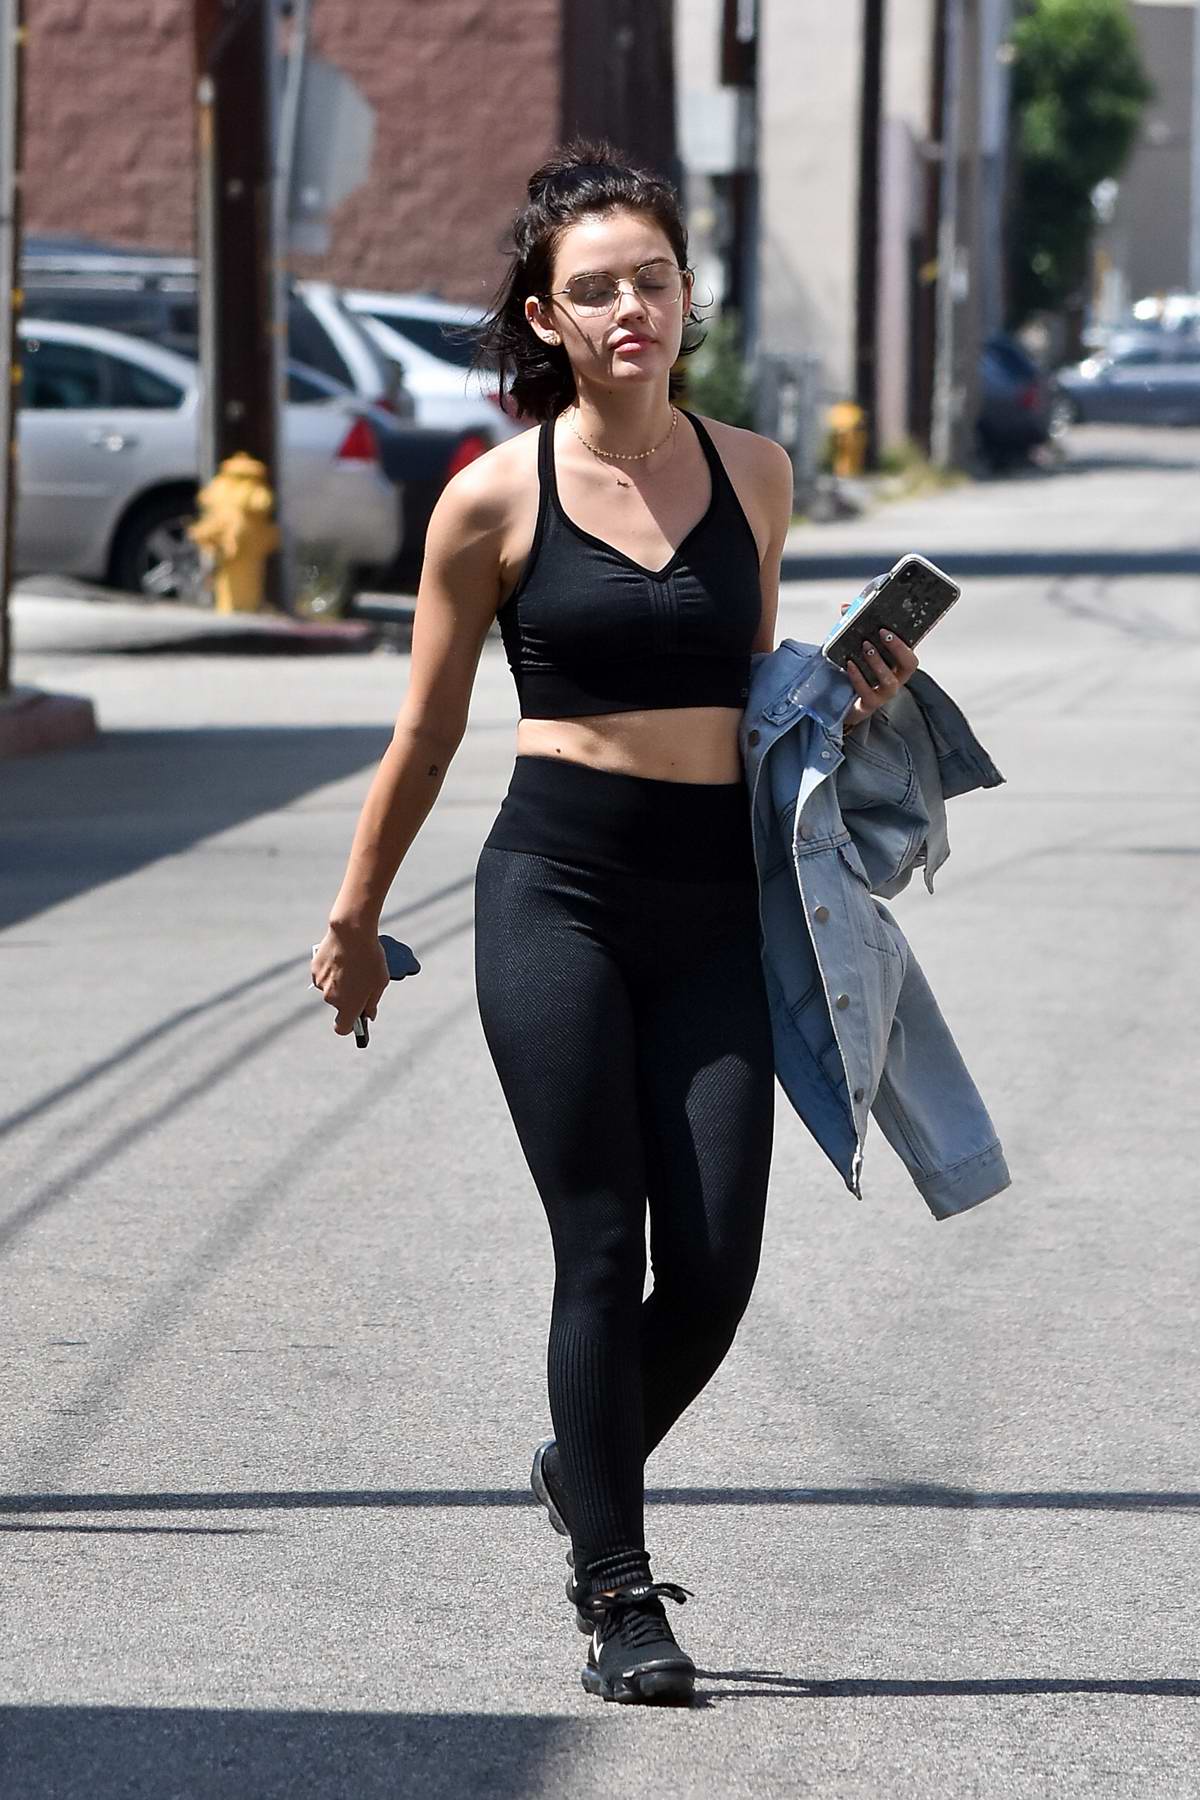 https://www.celebsfirst.com/wp-content/uploads/2018/09/lucy-hale-heads-out-in-a-black-sports-bra-and-leggings-after-a-workout-session-at-a-gym-in-los-angeles-010918_3.jpg